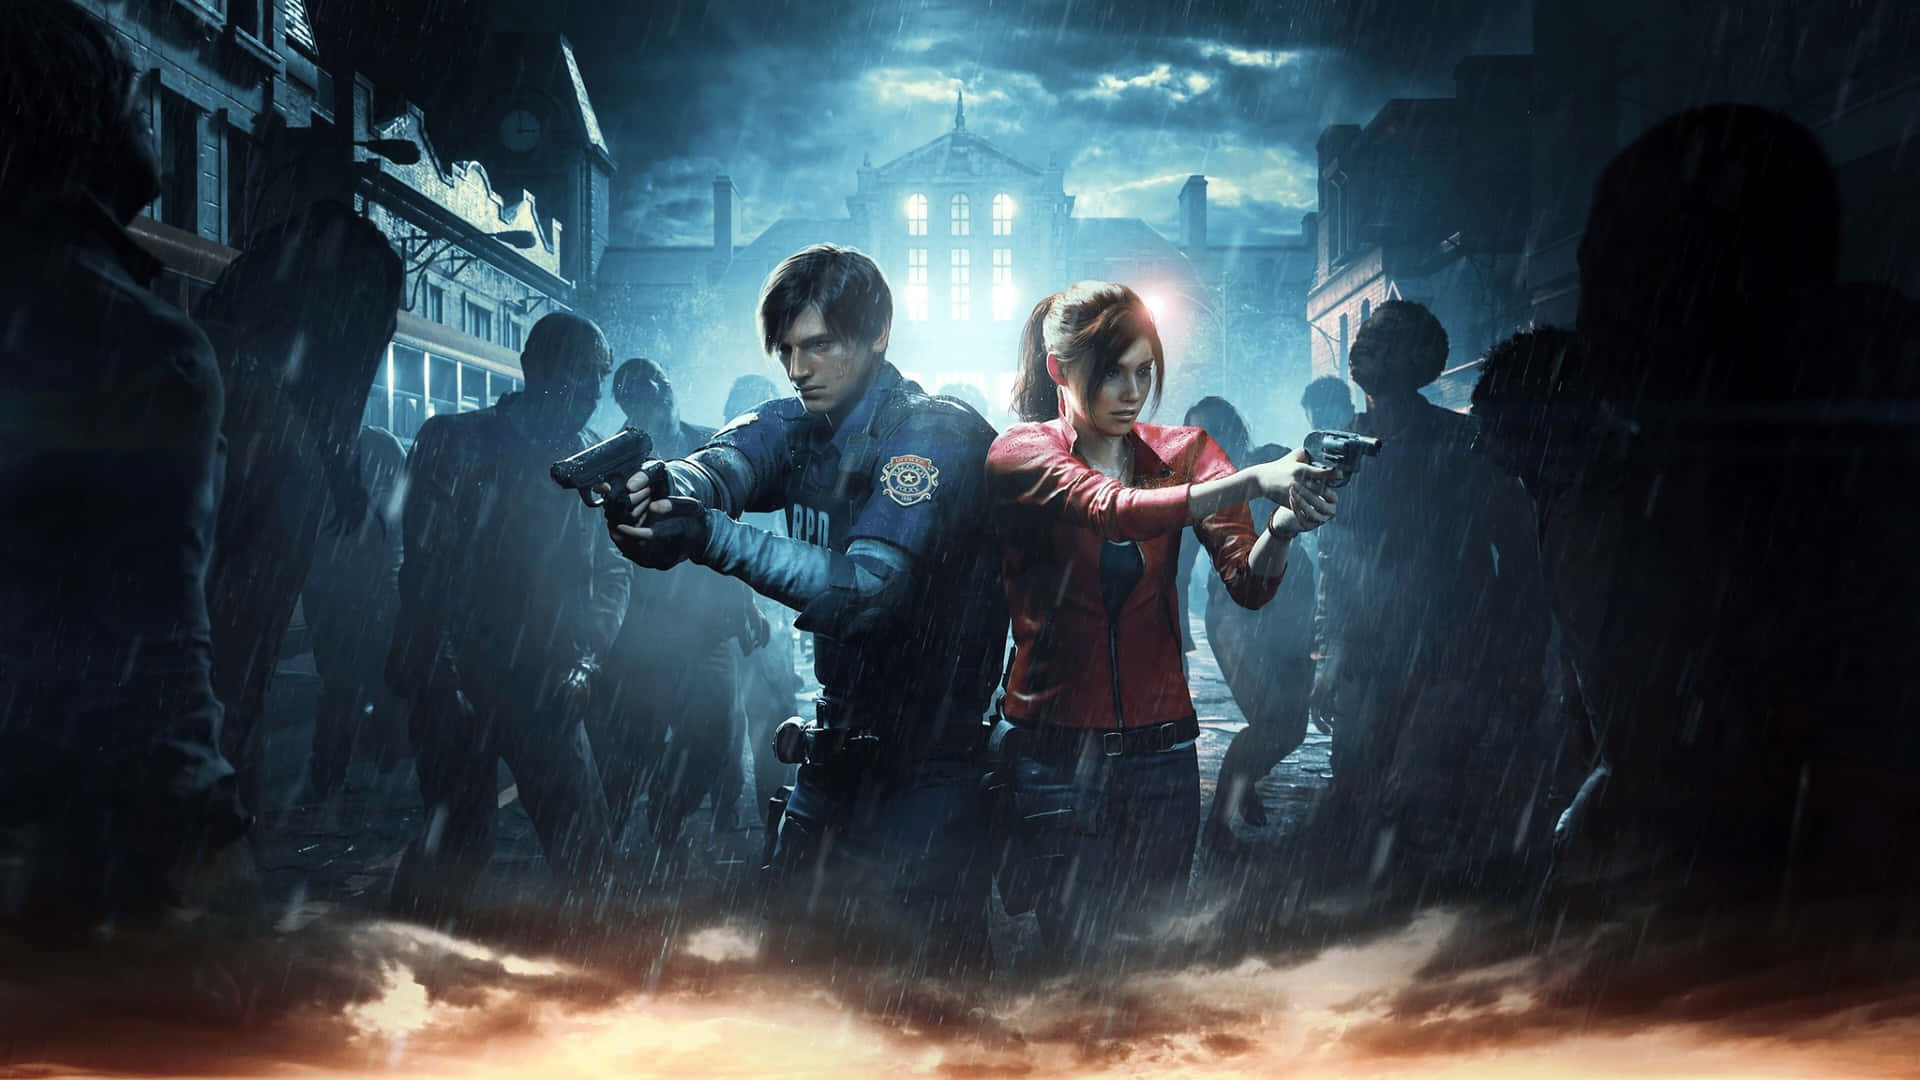 Intense Action in the World of Resident Evil